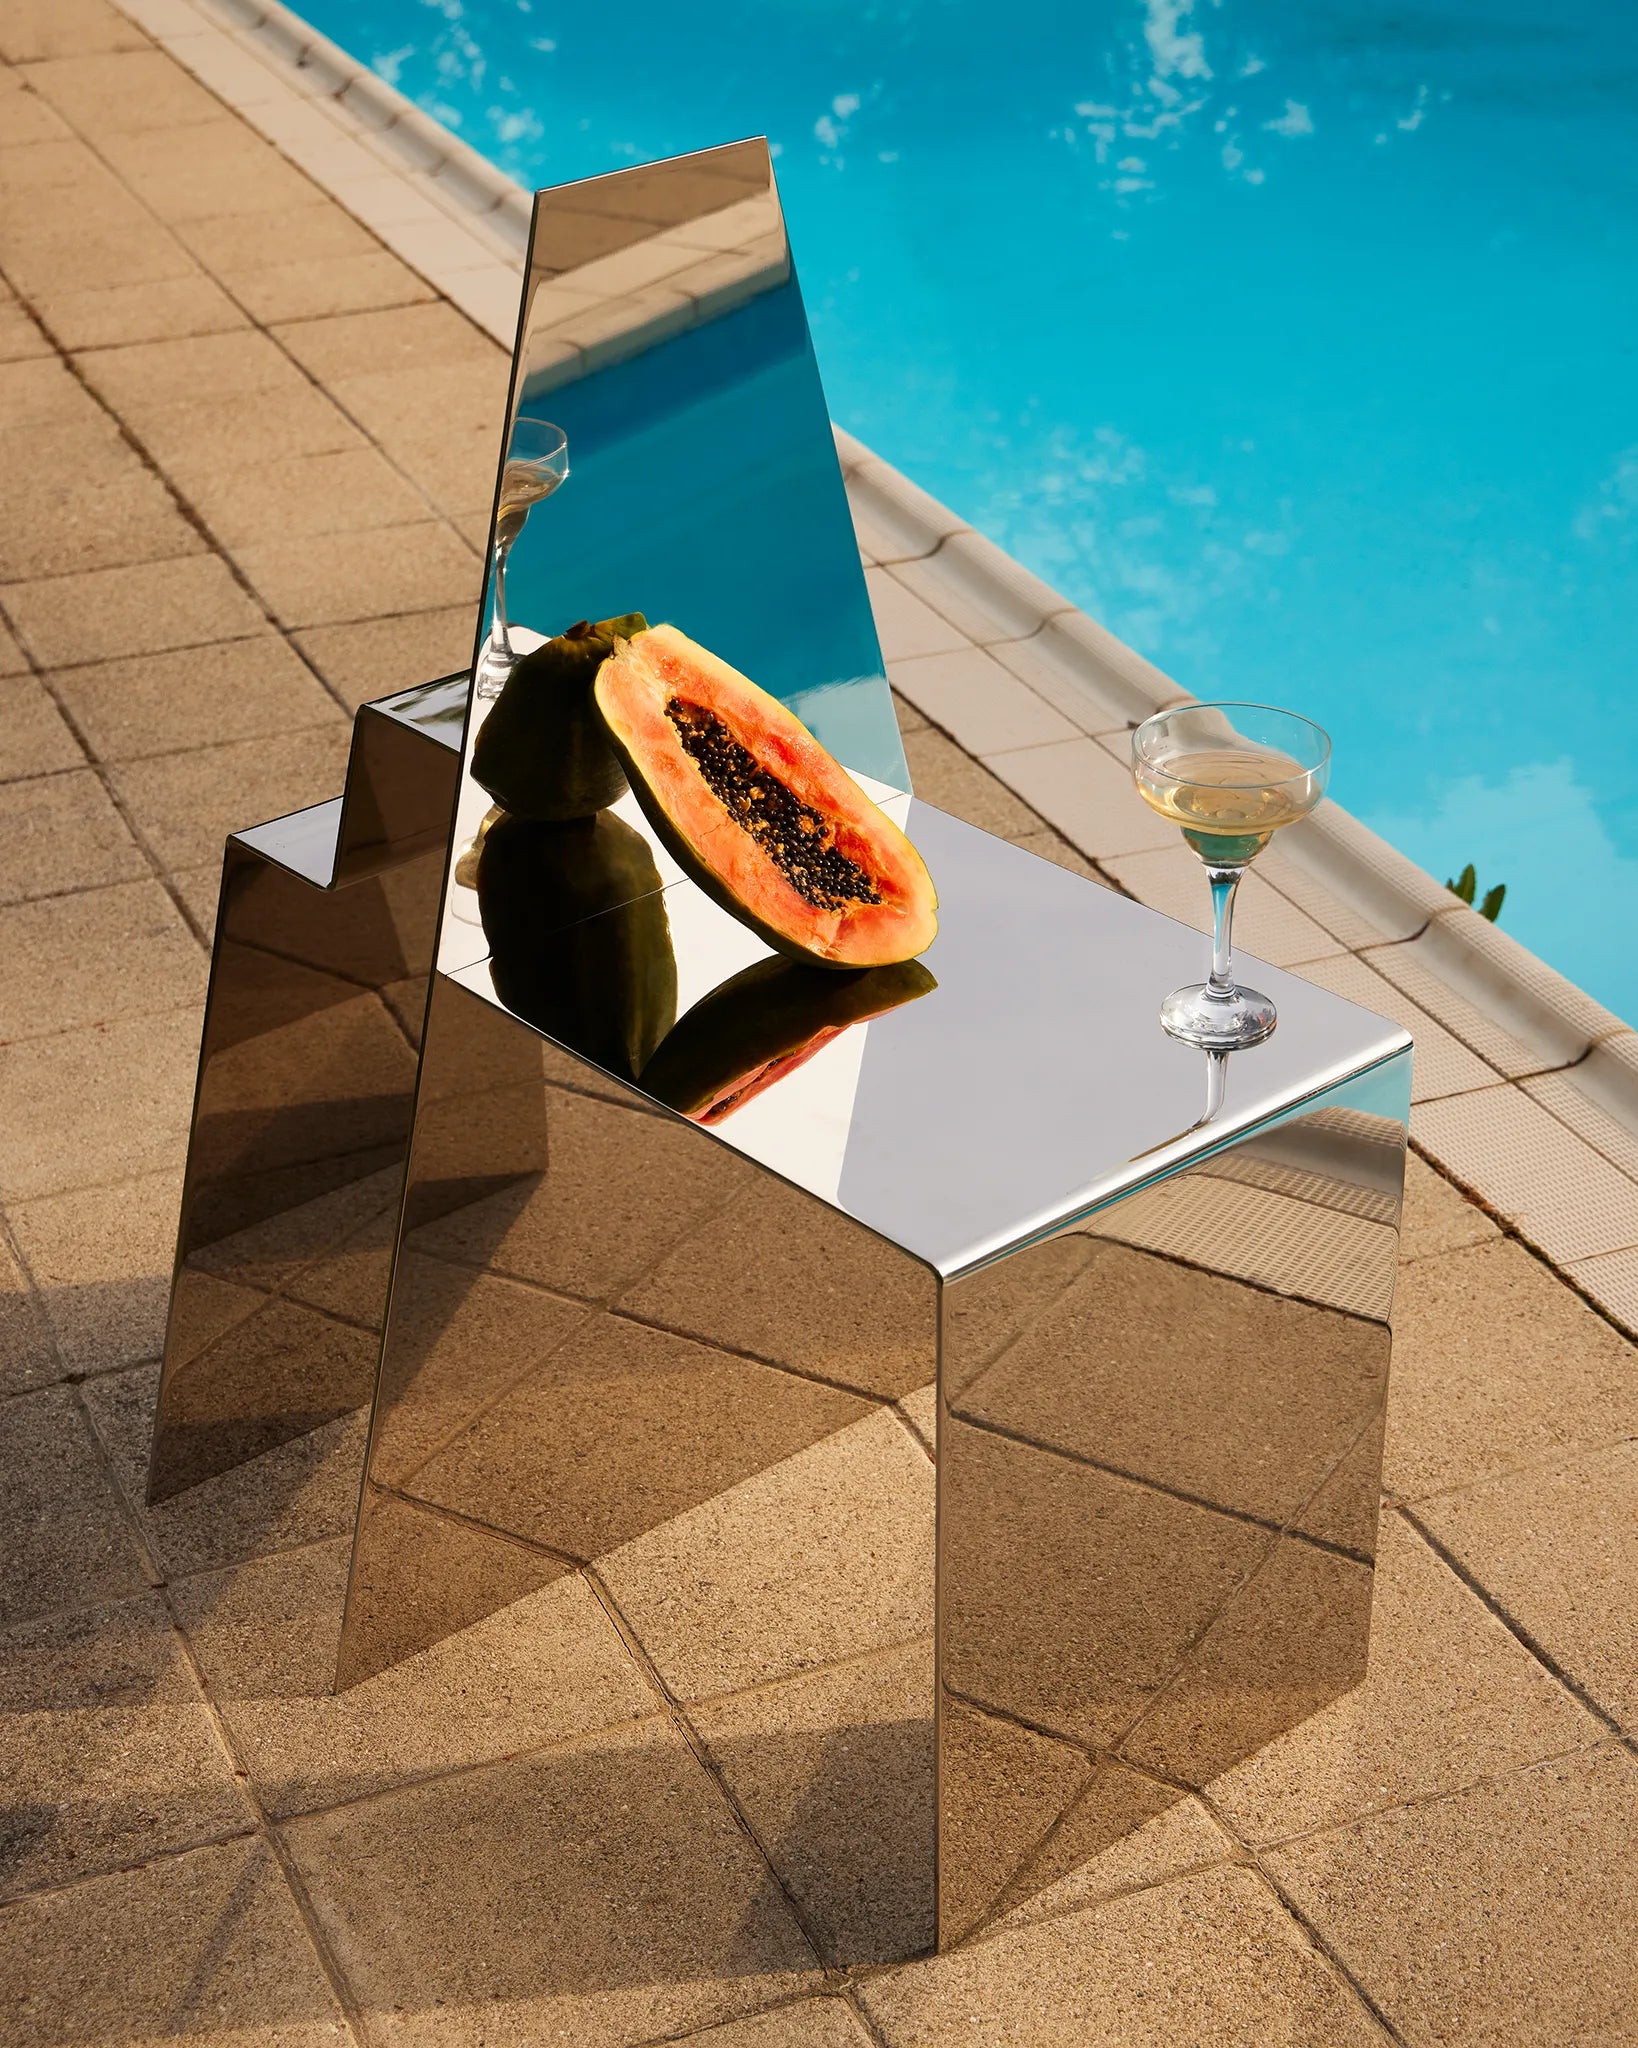 stainless-steel mirror chair with mesoamerican temple-like shape, in a summer setting on a poolside, with props like a half papaya and a glass of champagne